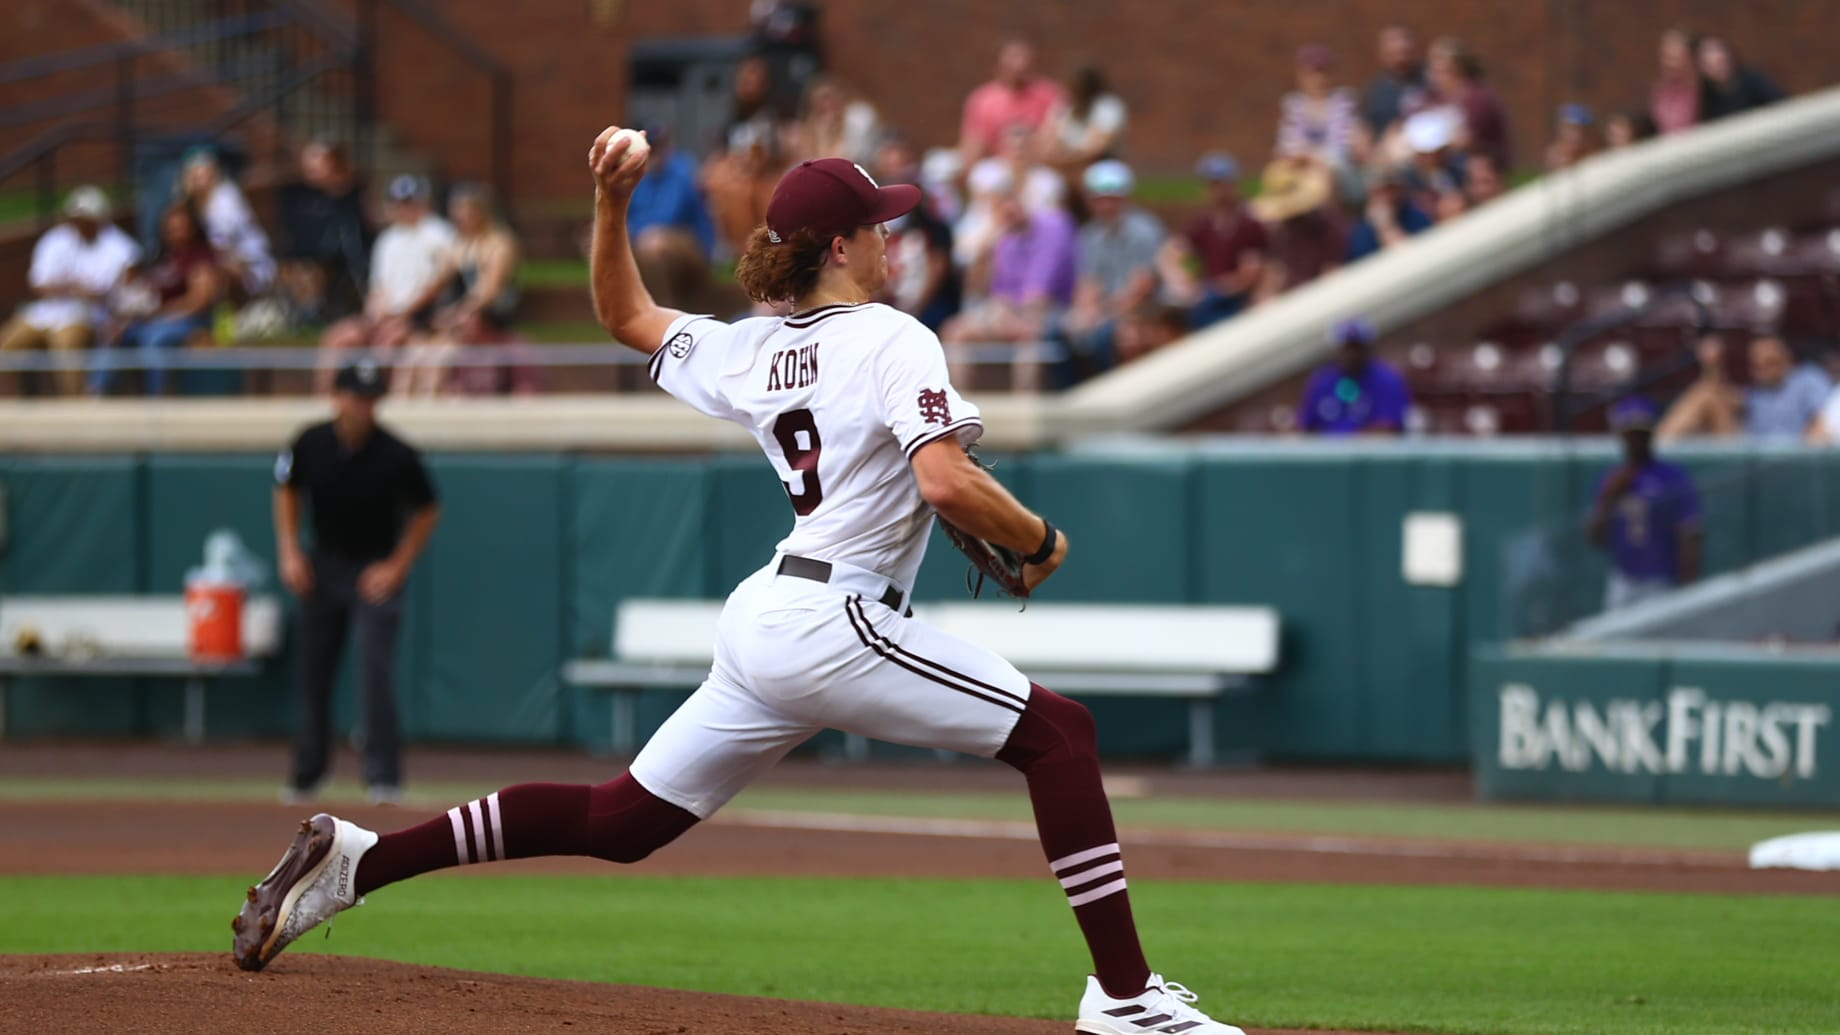 Mississippi State vs. Ole Miss: Governor’s Cup Baseball Showdown Updates